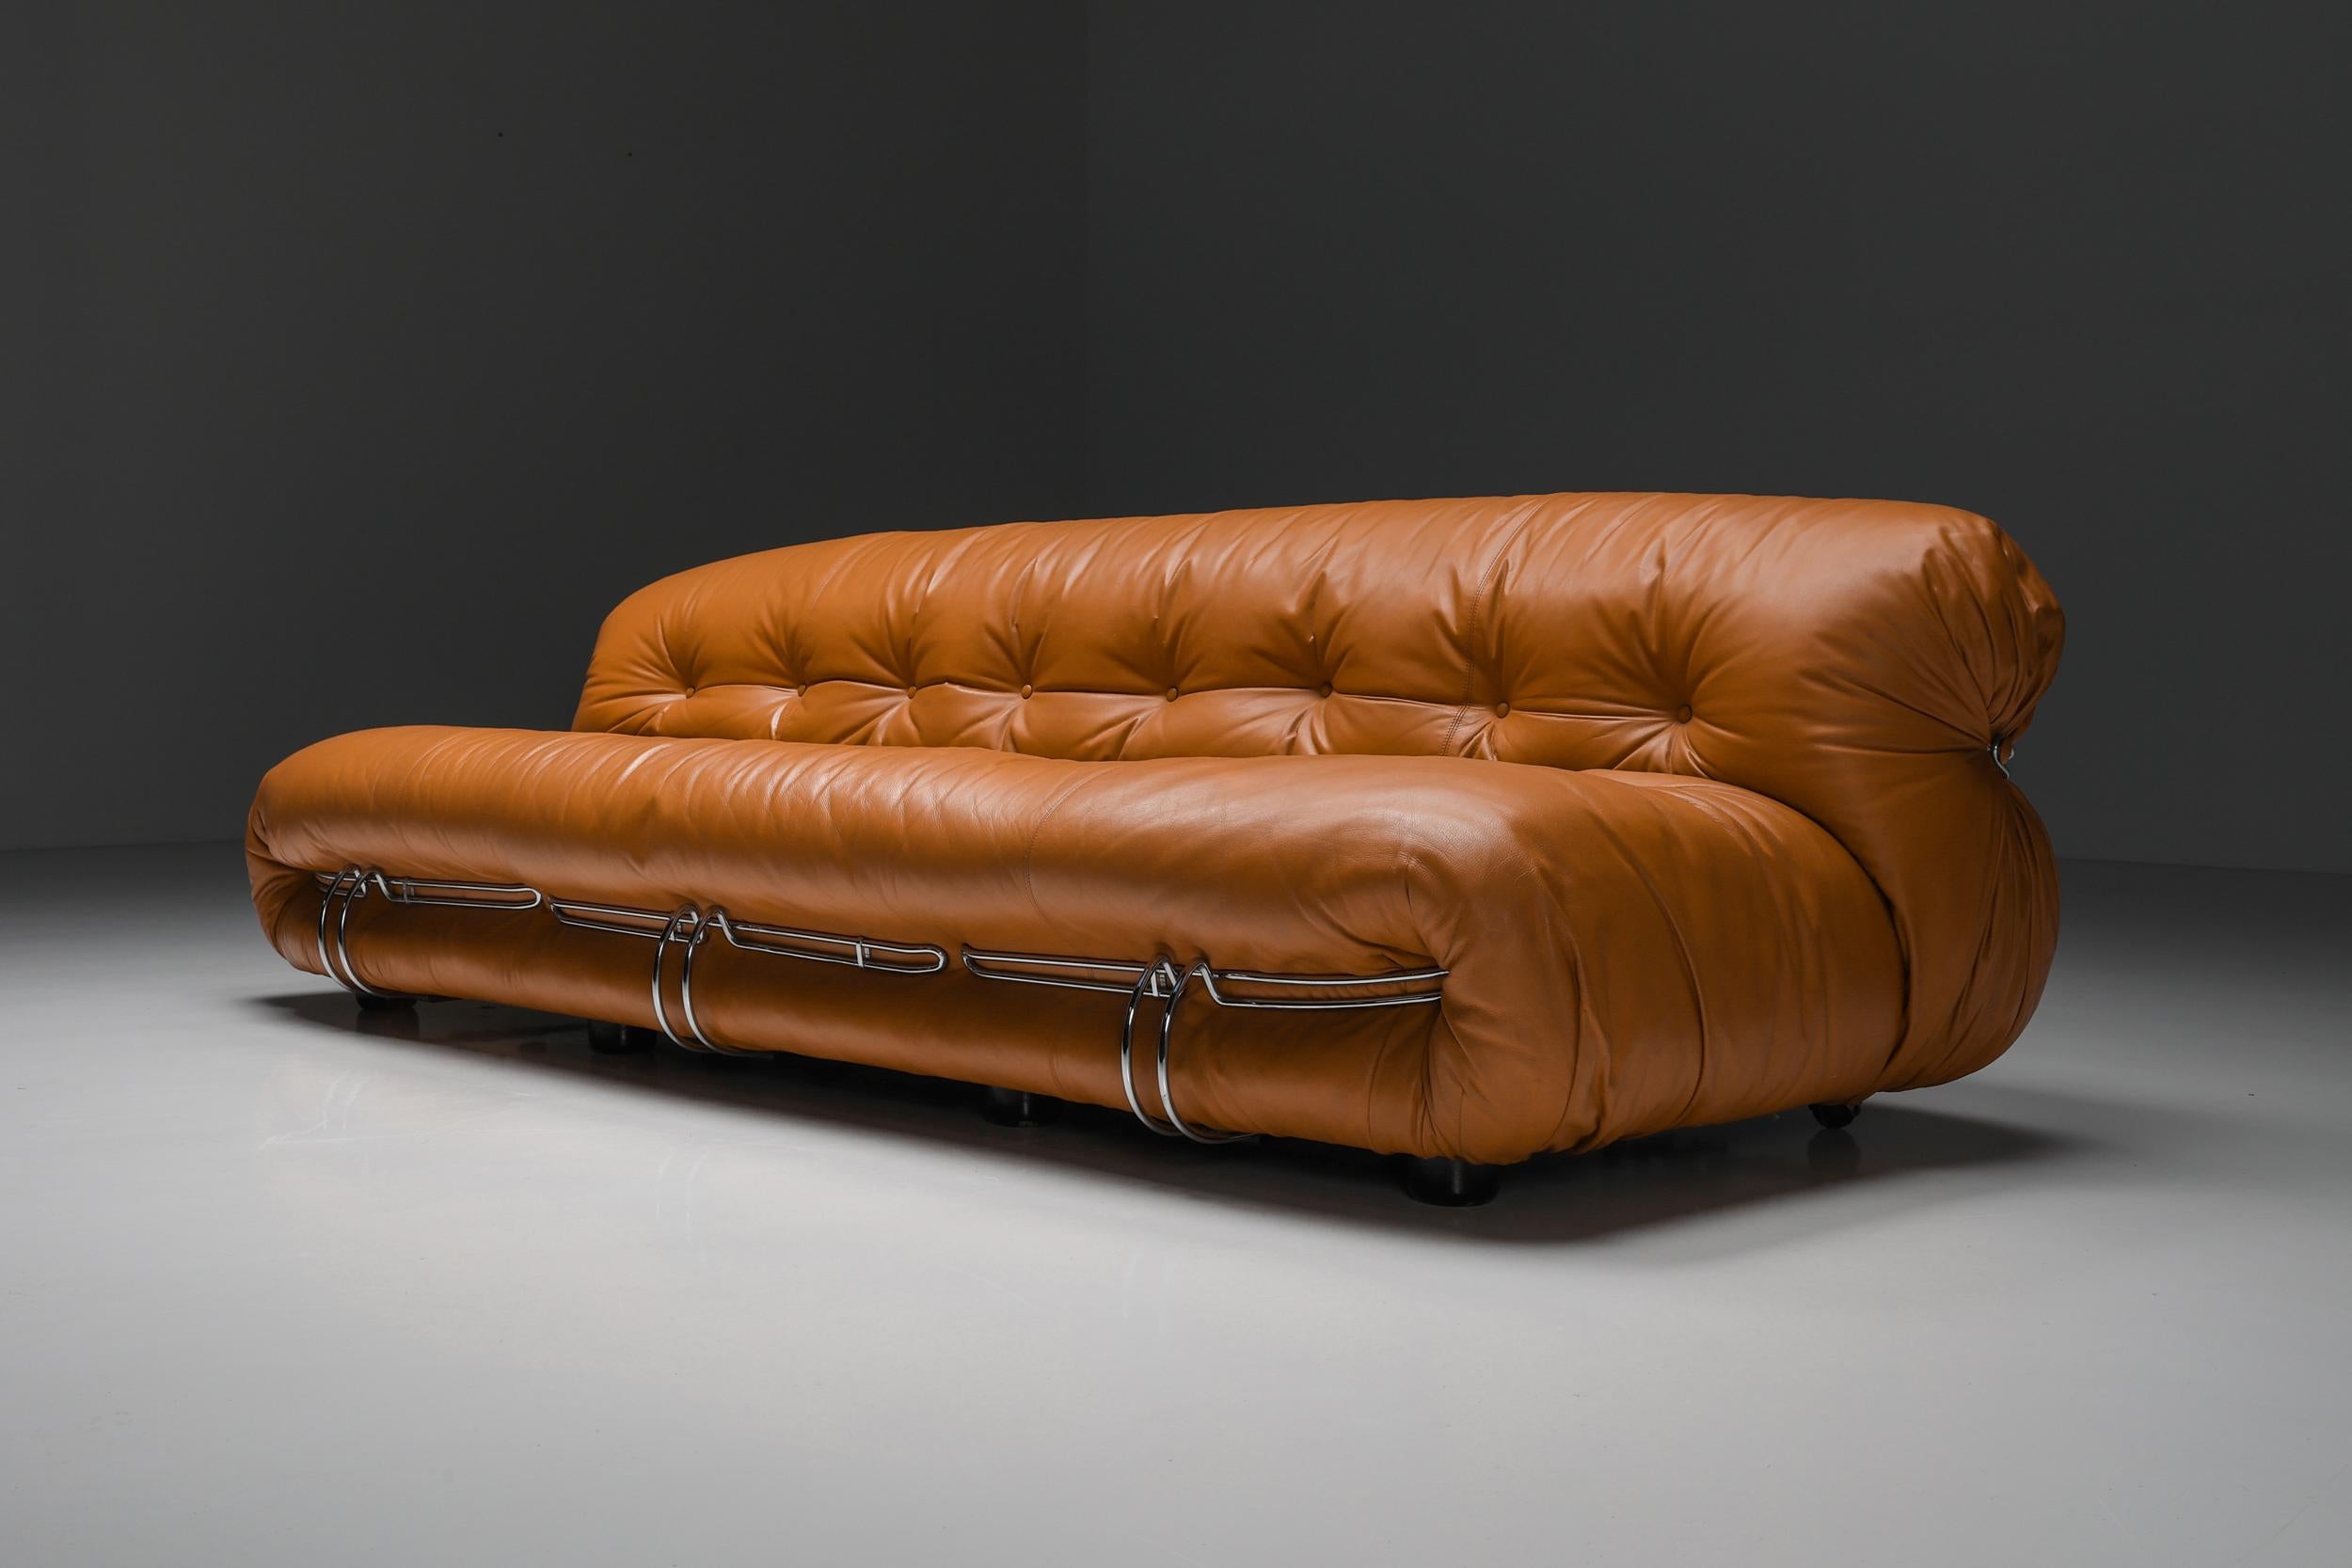 Italian Post-Modern, Cassina 'Soriana' Cognac Leather Sofa by Afra and Tobia Scarpa, 1970